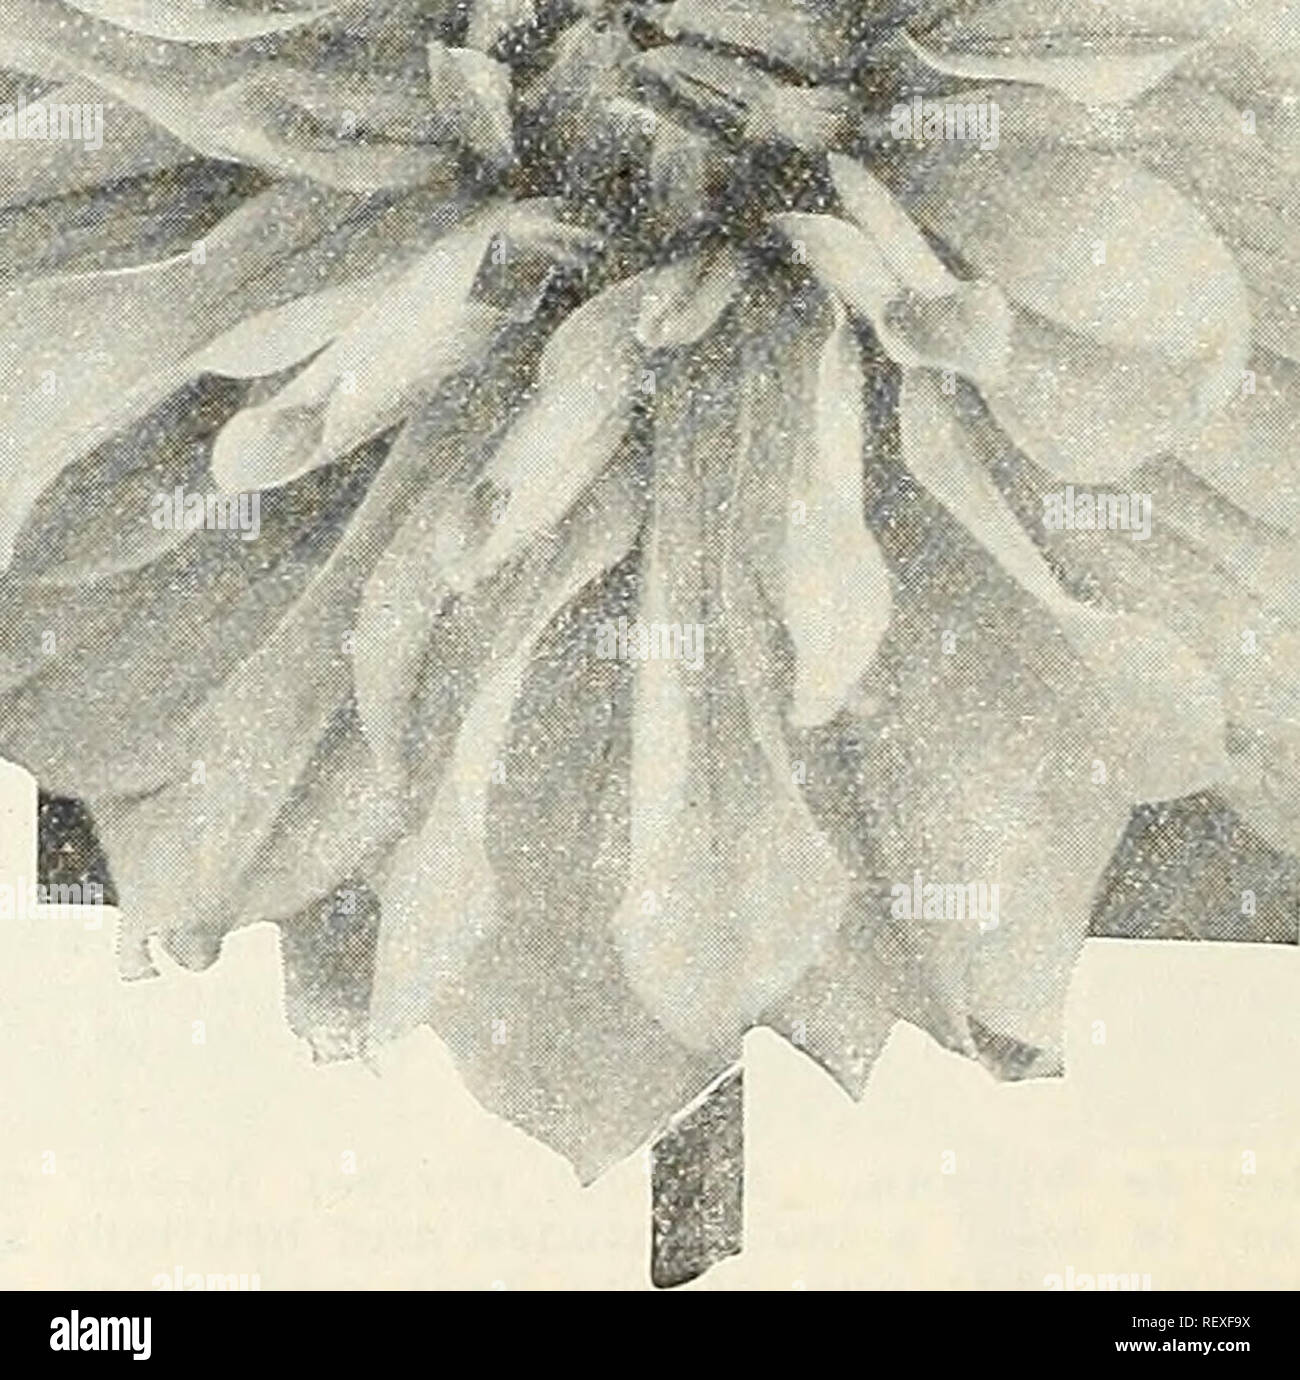 . Dreer's wholesale price list. Bulbs (Plants) Catalogs; Vegetables Seeds Catalogs; Flowers Seeds Catalogs; Nurseries (Horticulture) Catalogs; Gardening Equipment and supplies Catalogs. Decorative Dahlia, Jessie K. Prescott Harry Sheldon, Jr. A large well formed flower of de- lightful color, the outer petals of a bright lavender- pink with creamy-white centre, strong semi-dwarf habit of growth. $5.00 per doz.; §40.00 per 100. SELECT DECORATIVE DAHLIAS (Continued) Jersey's Sweetheart. A dainty attractive pink, shad- ing to white in centre; flowers produced in abun- dance on slender stiff stems; Stock Photo